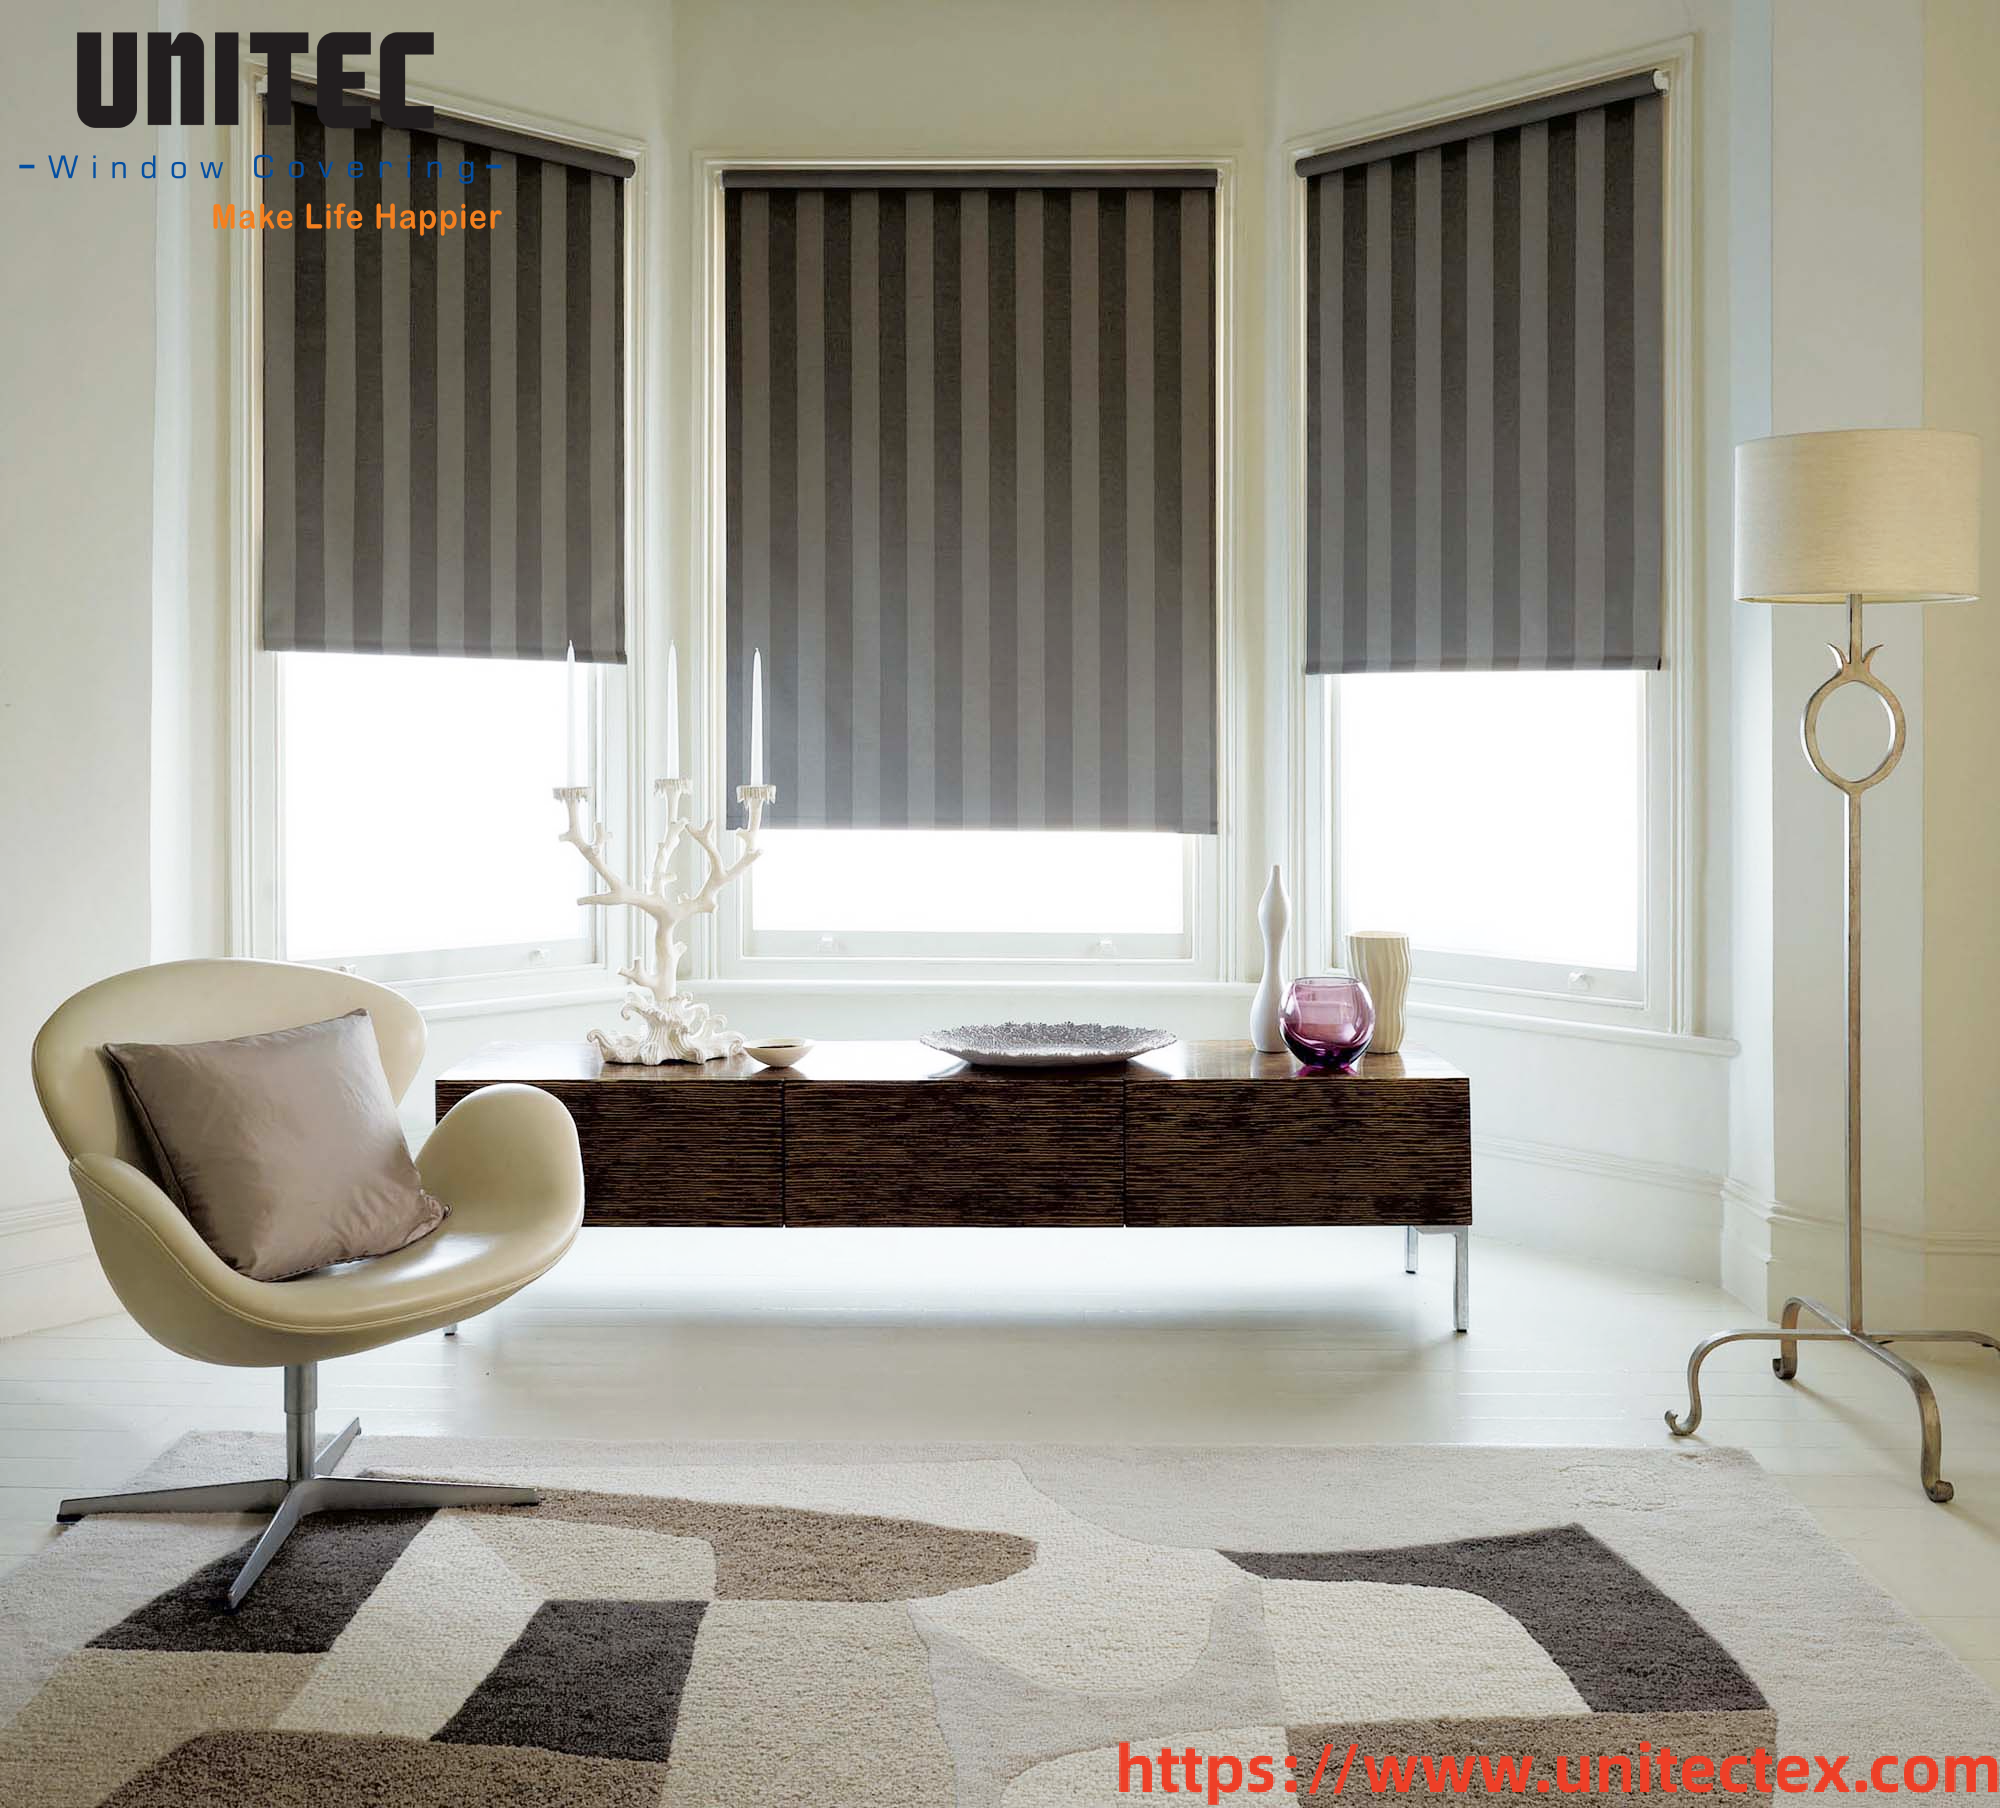 Bedroom in home blinds 4 forms, each has advantages and disadvantages